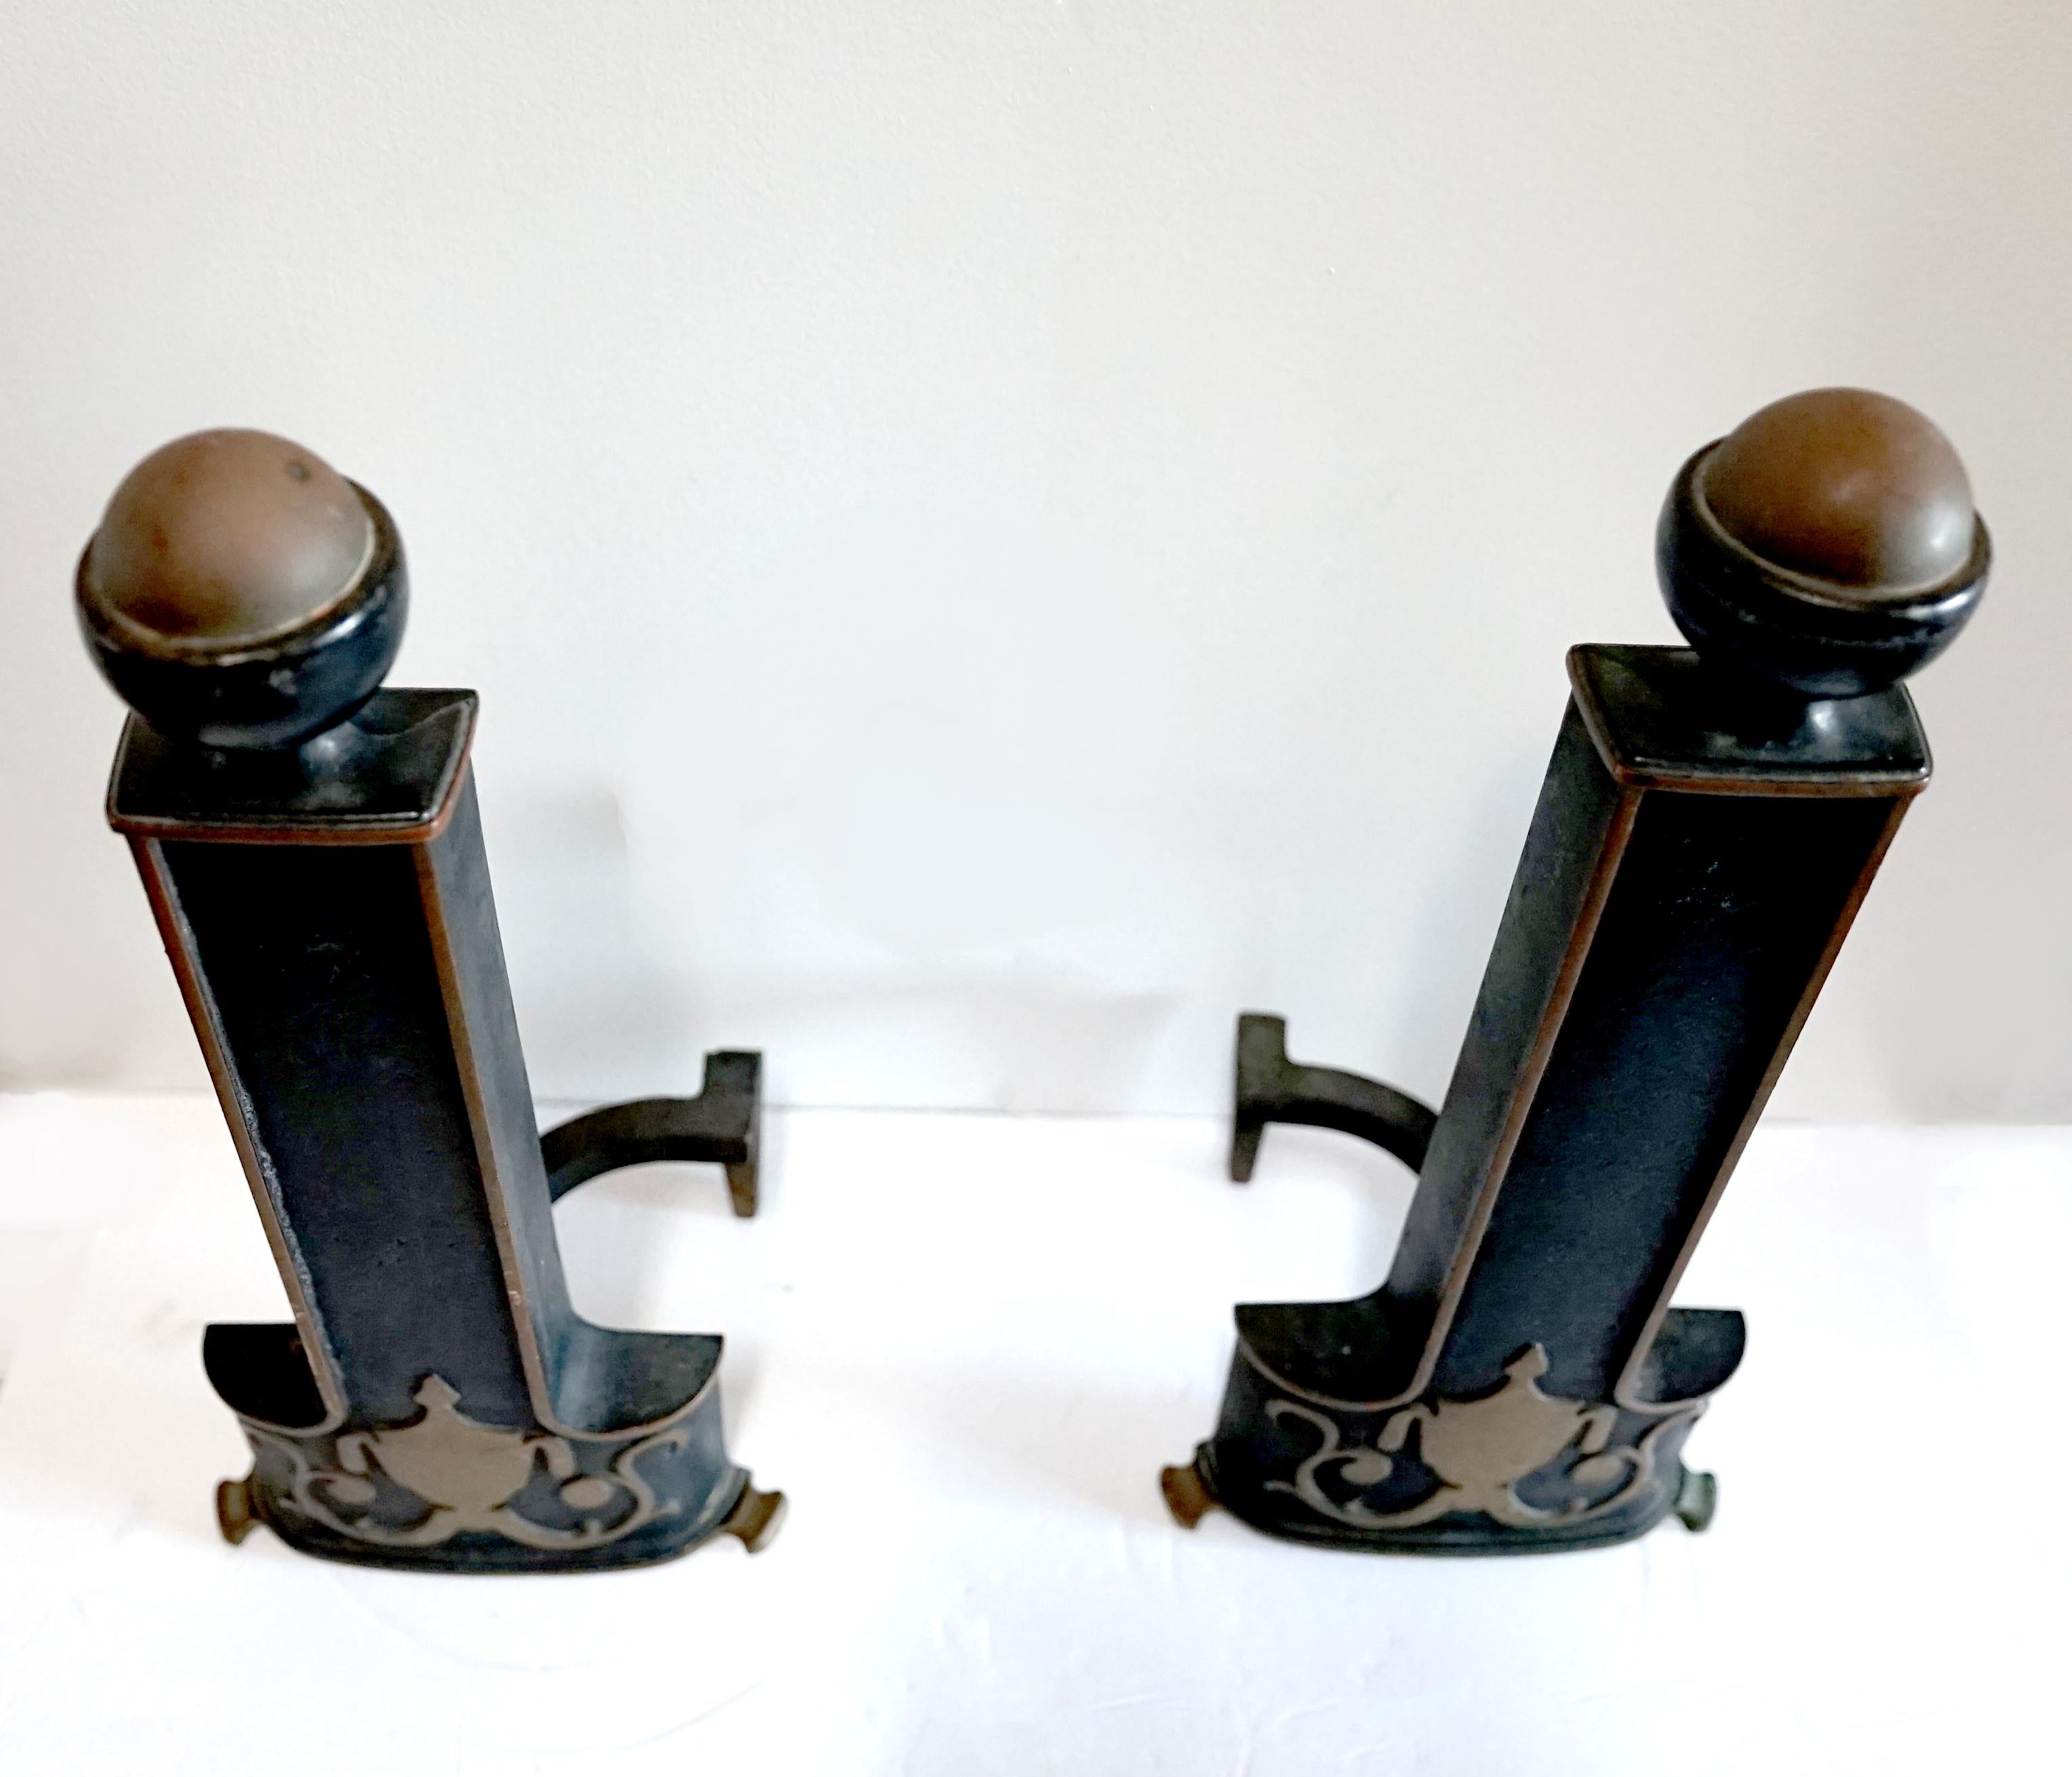 We love this pair of andirons for its stately air. The pair of Neoclassical style ebonized copper ball-top andirons are probably European, and from the early 20th Century. They are distinctive pieces for any hearth. 
Each surmounted by a copper ball